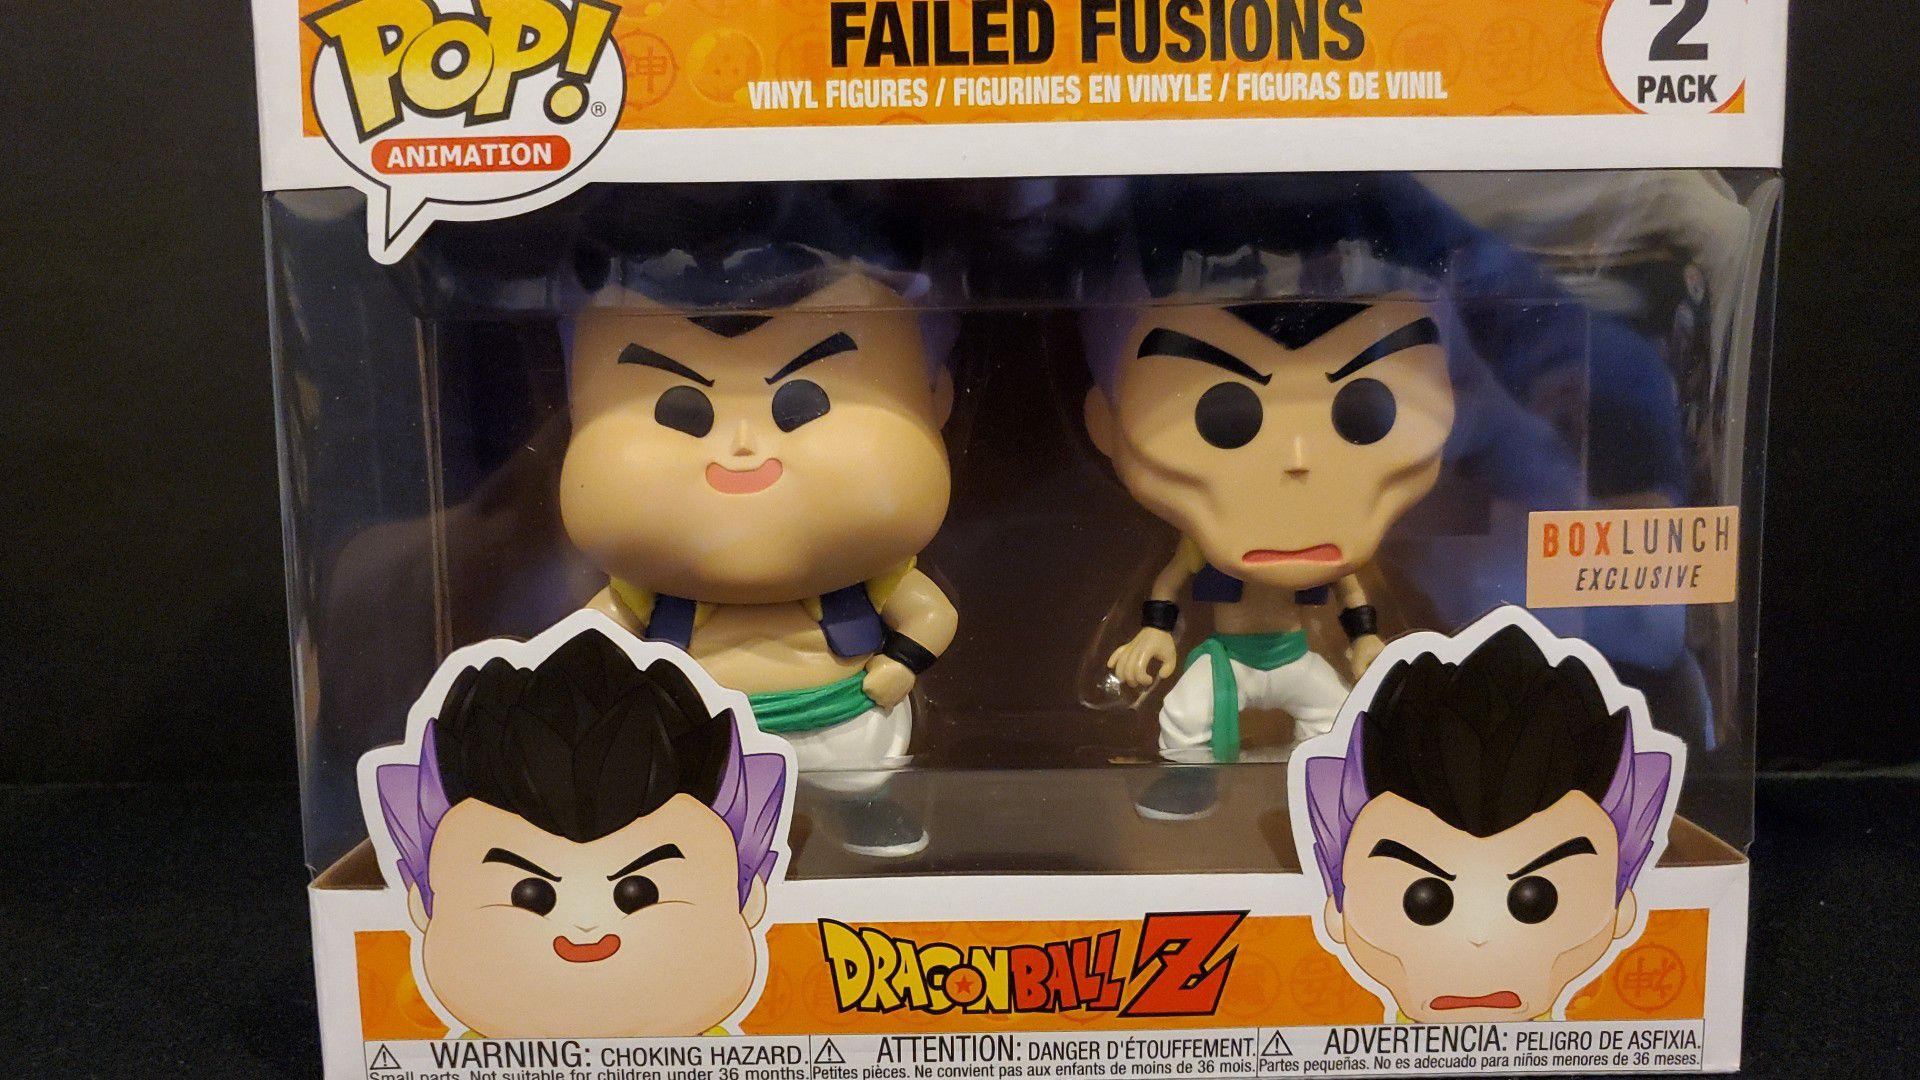 DRAGONBALL Z FAILED FUSIONS EXCLUSIVE 2 PACK